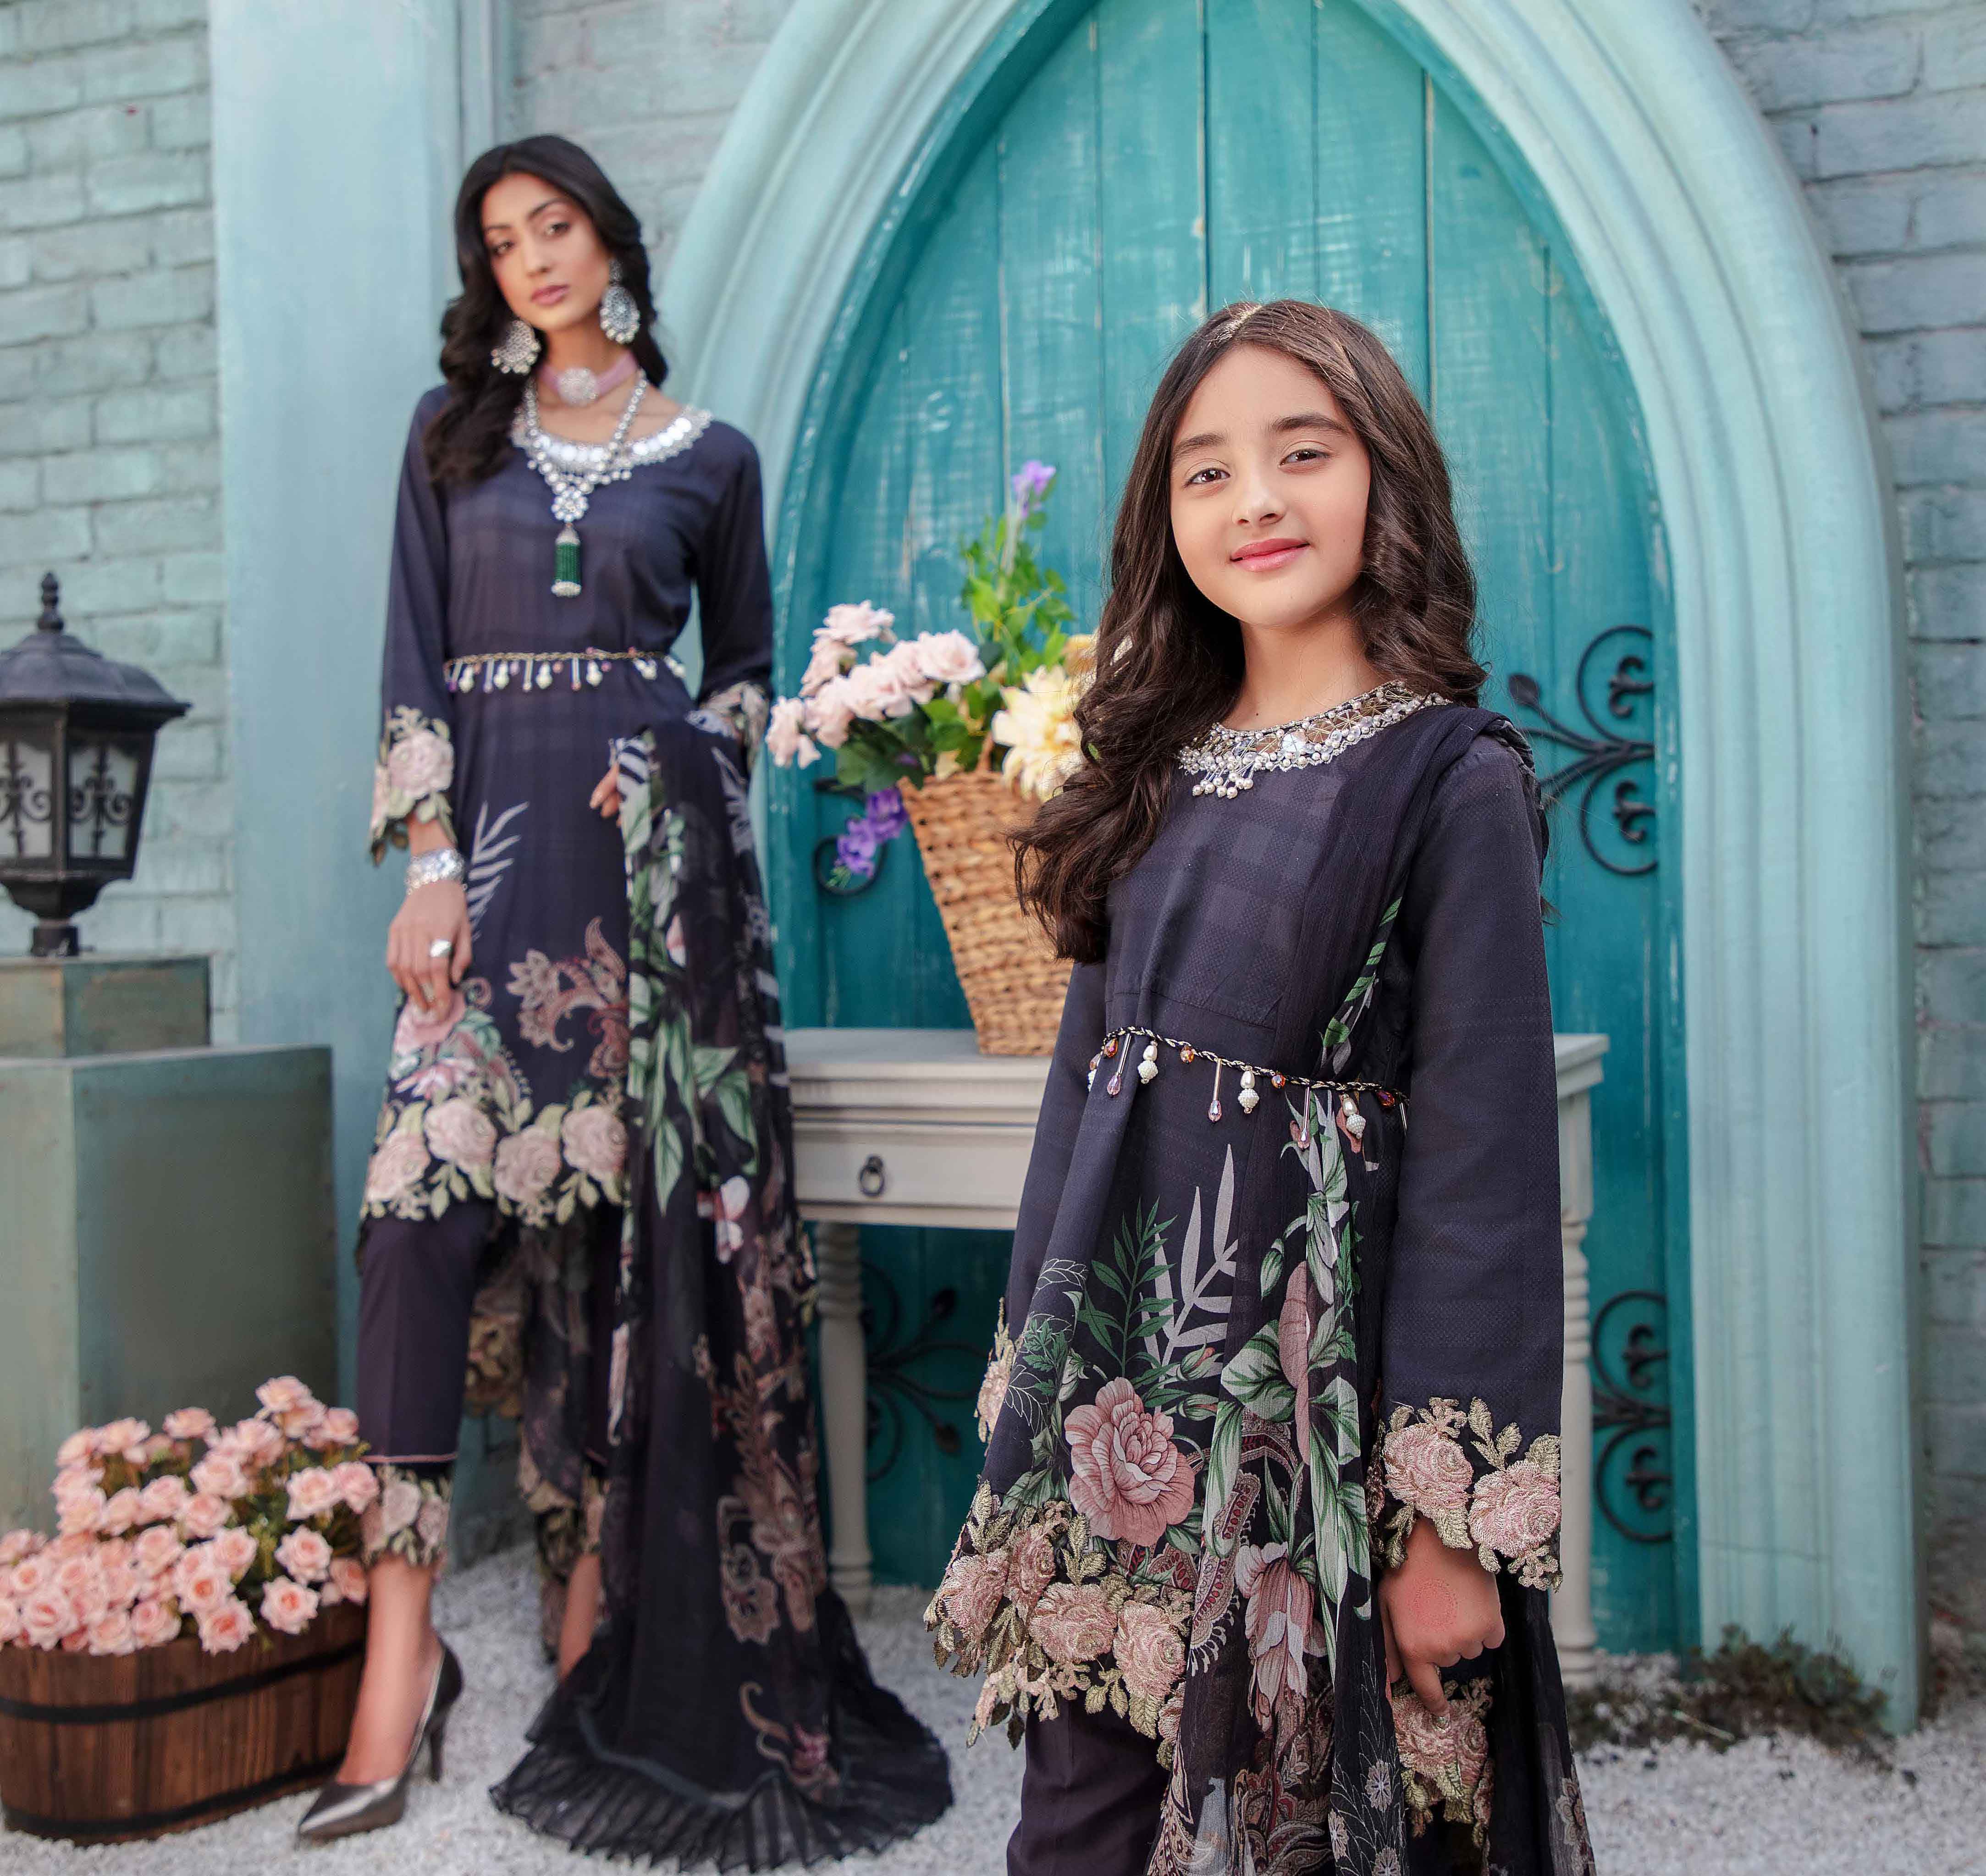 Ivana Kids Digital Print Trail Mother & Daughter Eid Outfit with Embroidered Trousers S2117K - Desi Posh